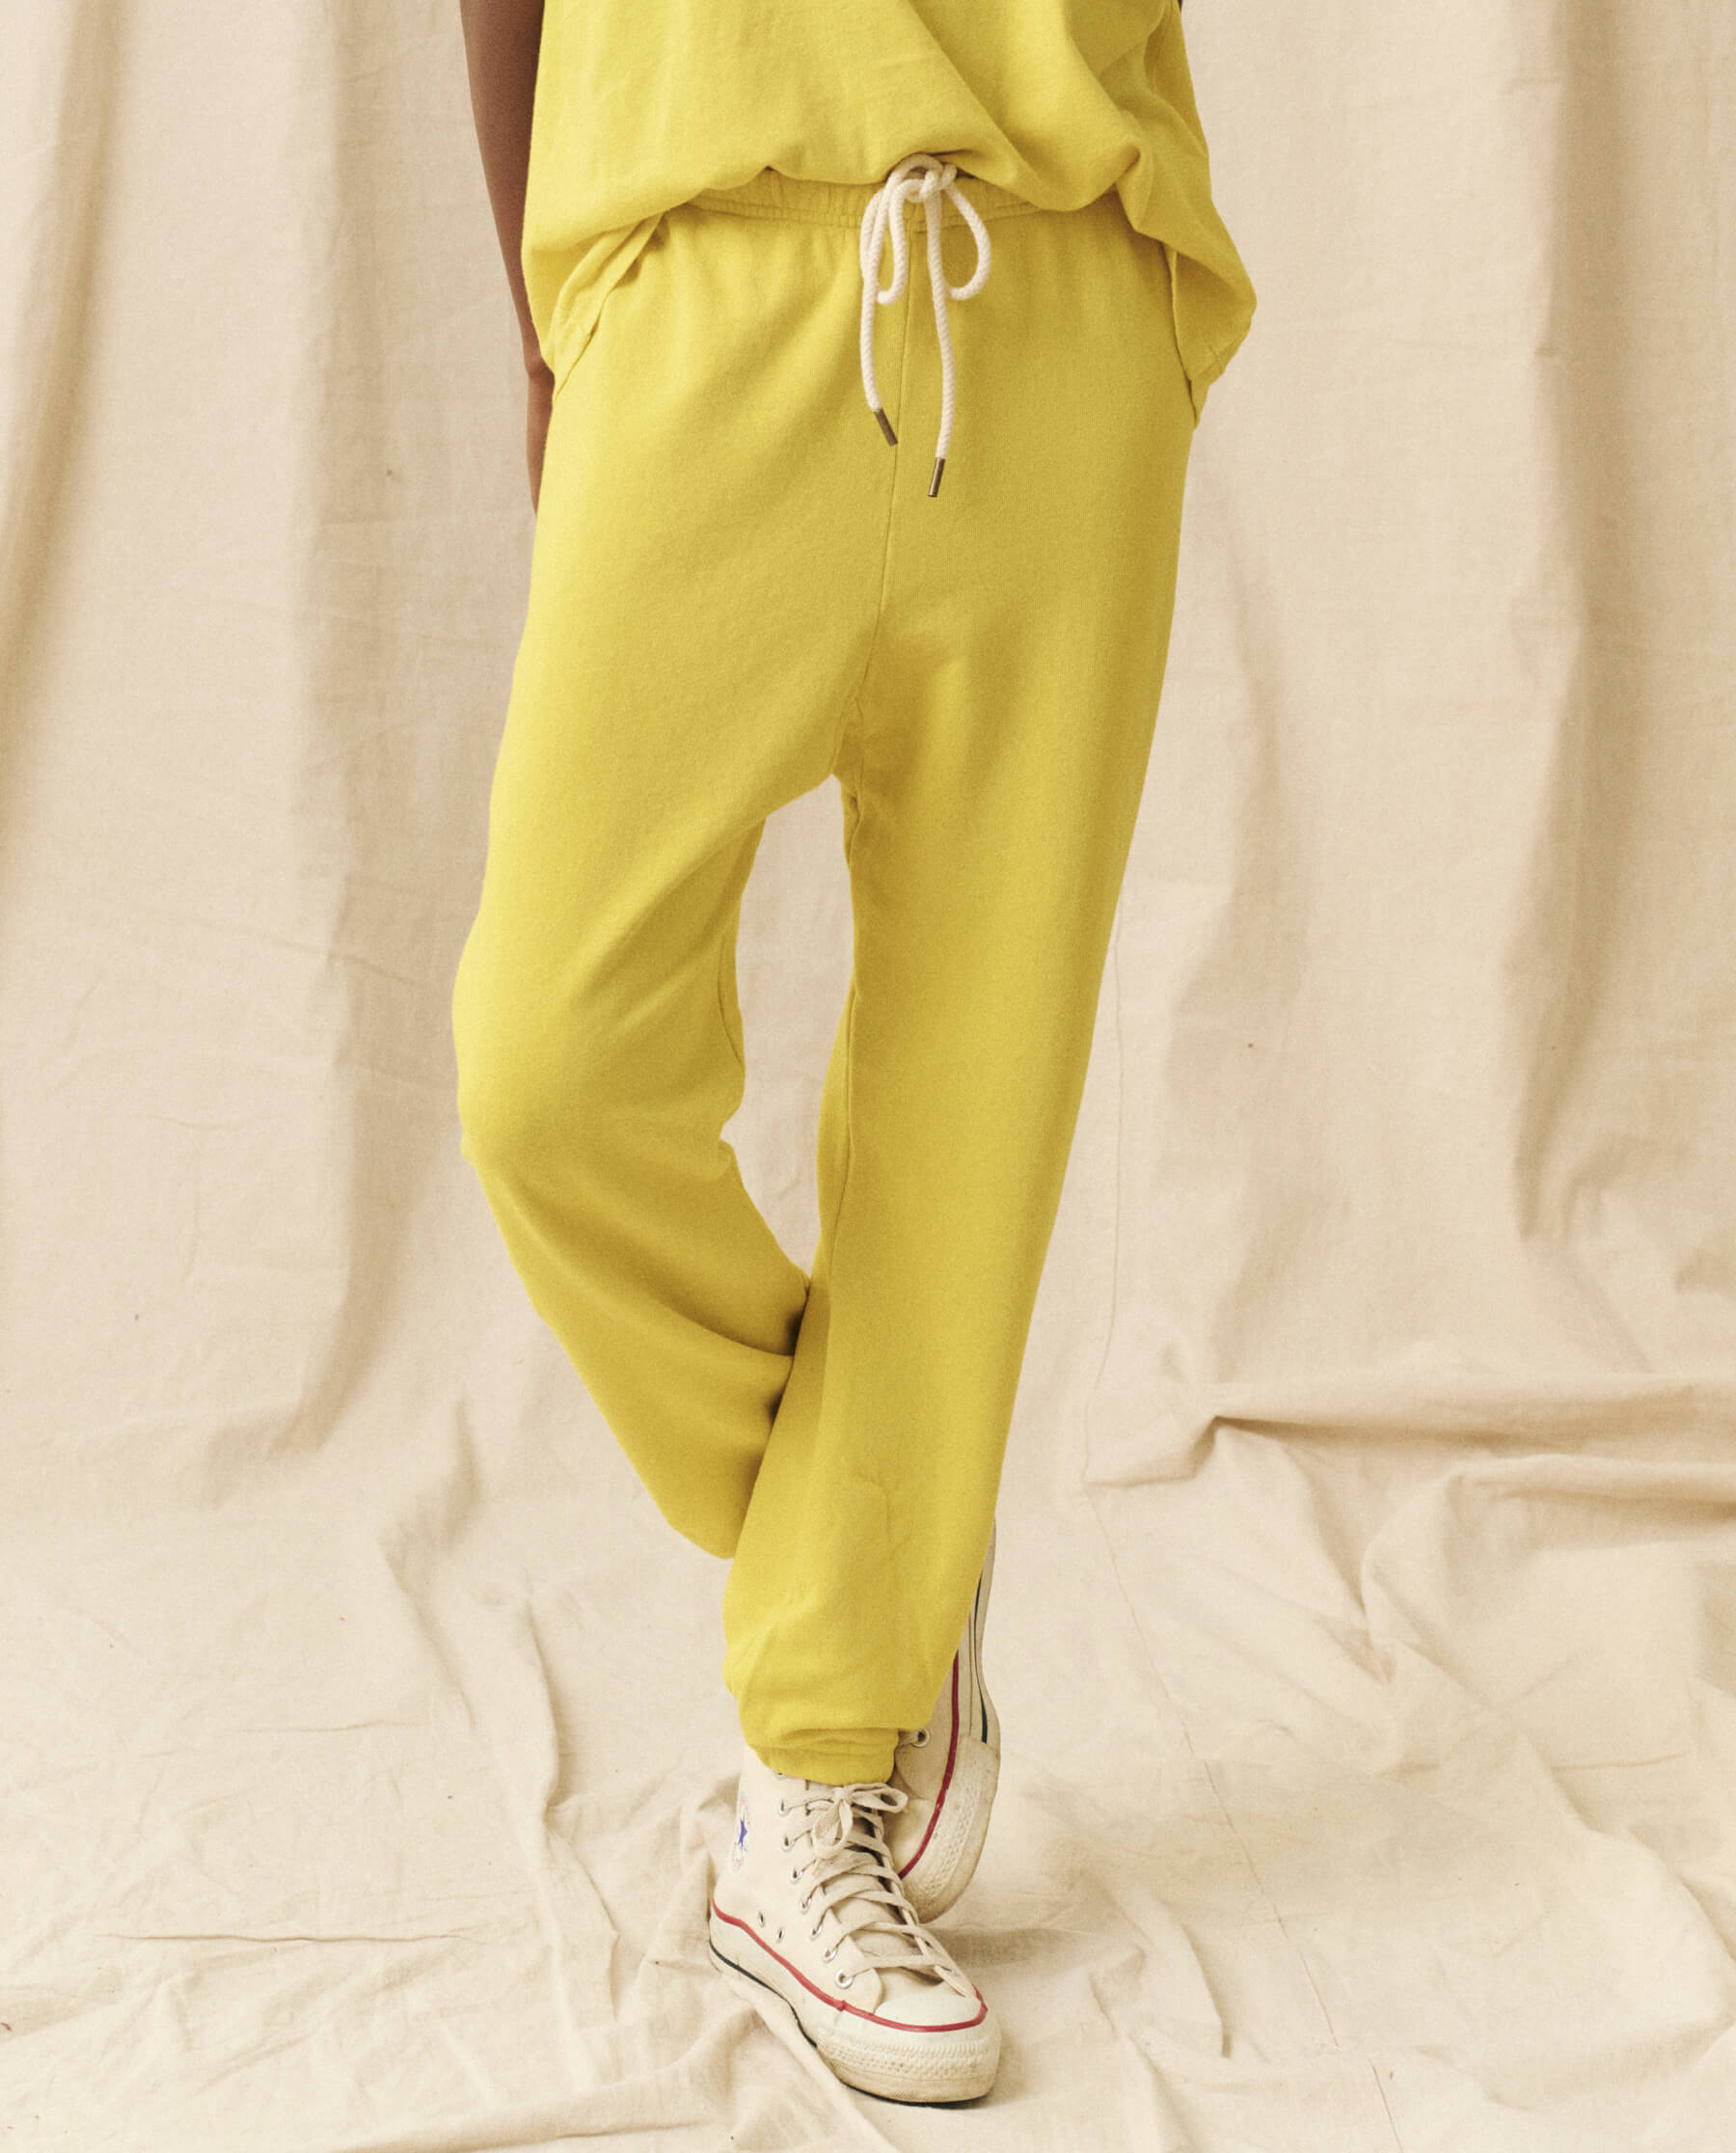 The Stadium Sweatpant. Solid -- Sunbeam SWEATPANTS THE GREAT. SP24 KNITS